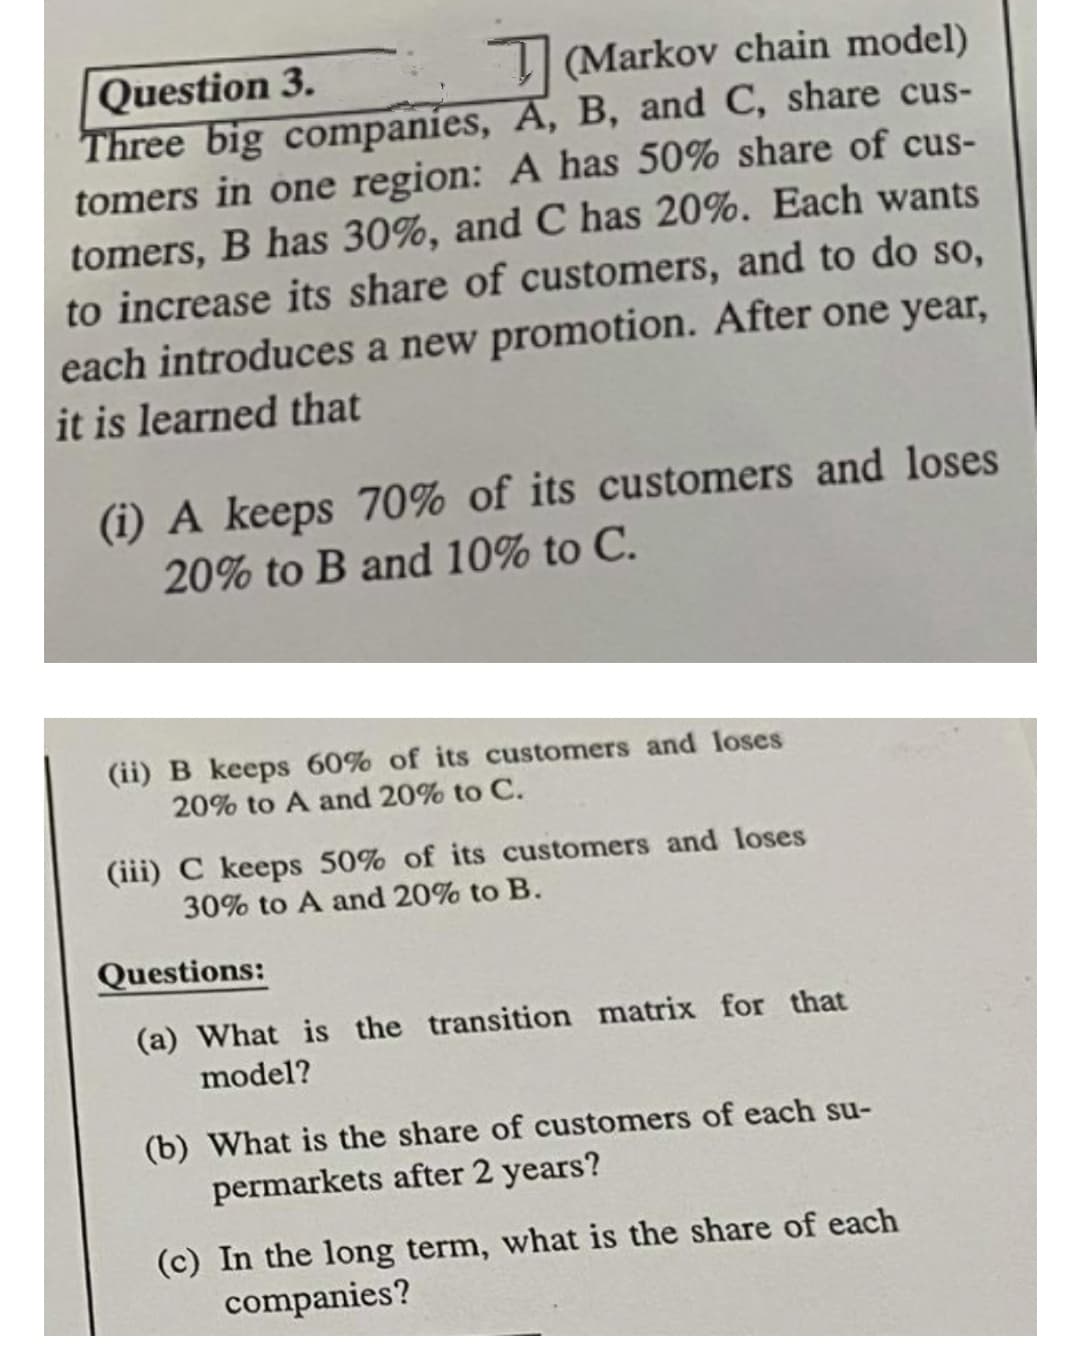 I (Markov chain model)
Question 3.
Three big companies, A, B, and C, share cus-
tomers in one region: A has 50% share of cus-
tomers, B has 30%, and C has 20%. Each wants
to increase its share of customers, and to do so,
each introduces a new promotion. After one year,
it is learned that
(i) A keeps 70% of its customers and loses
20% to B and 10% to C.
(ii) B keeps 60% of its customers and loses
20% to A and 20% to C.
(iii) C keeps 50% of its customers and loses
30% to A and 20% to B.
Questions:
(a) What is the transition matrix for that
model?
(b) What is the share of customers of each su-
permarkets after 2 years?
(c) In the long term, what is the share of each
companies?
